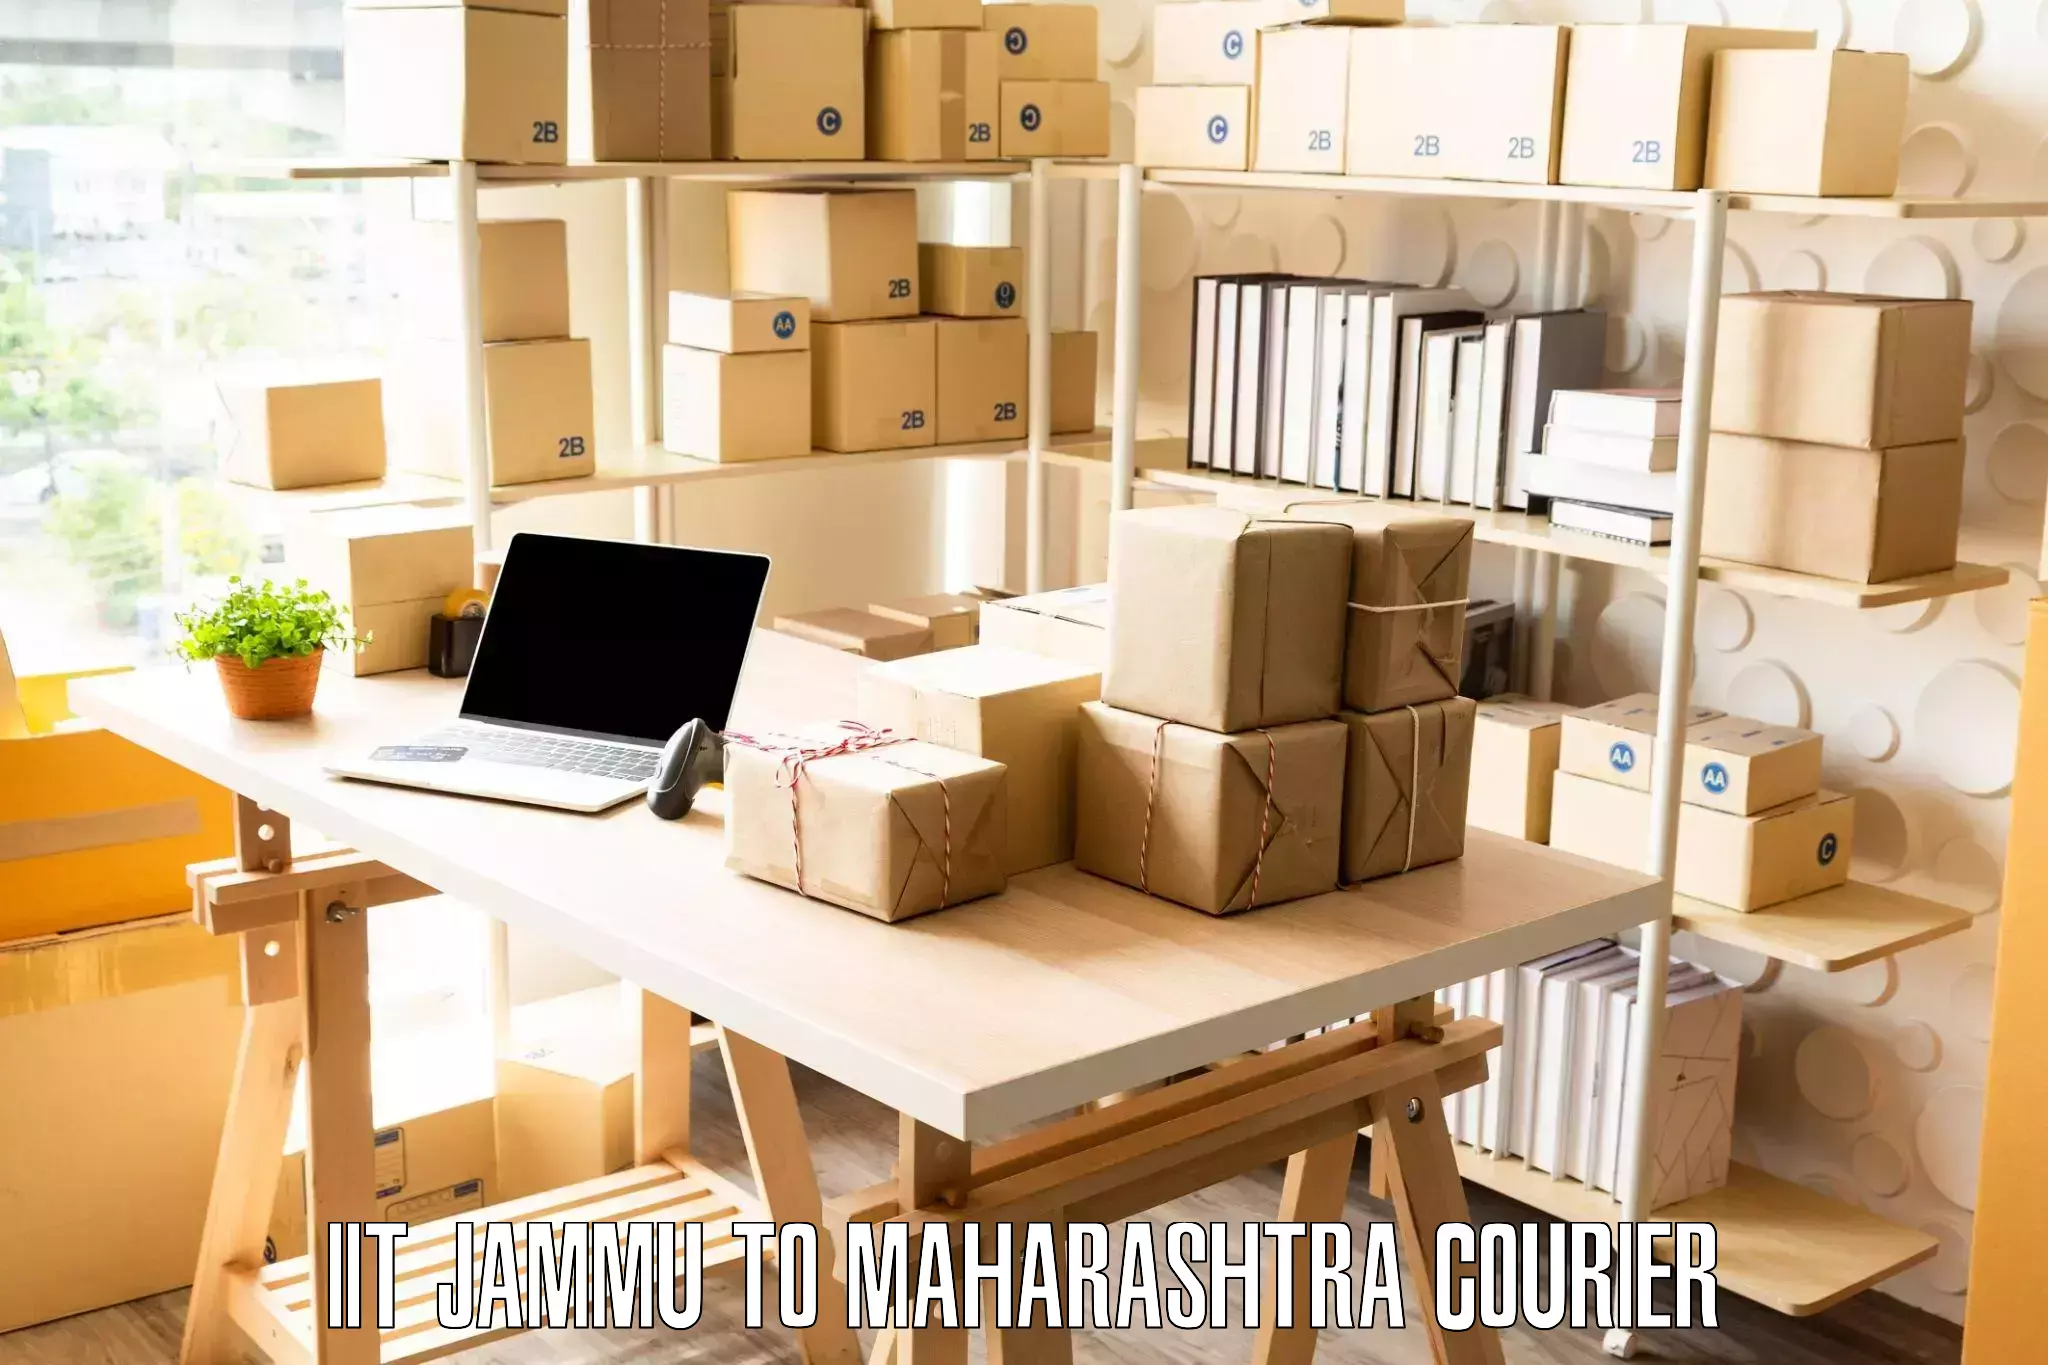 Professional movers and packers IIT Jammu to Aheri